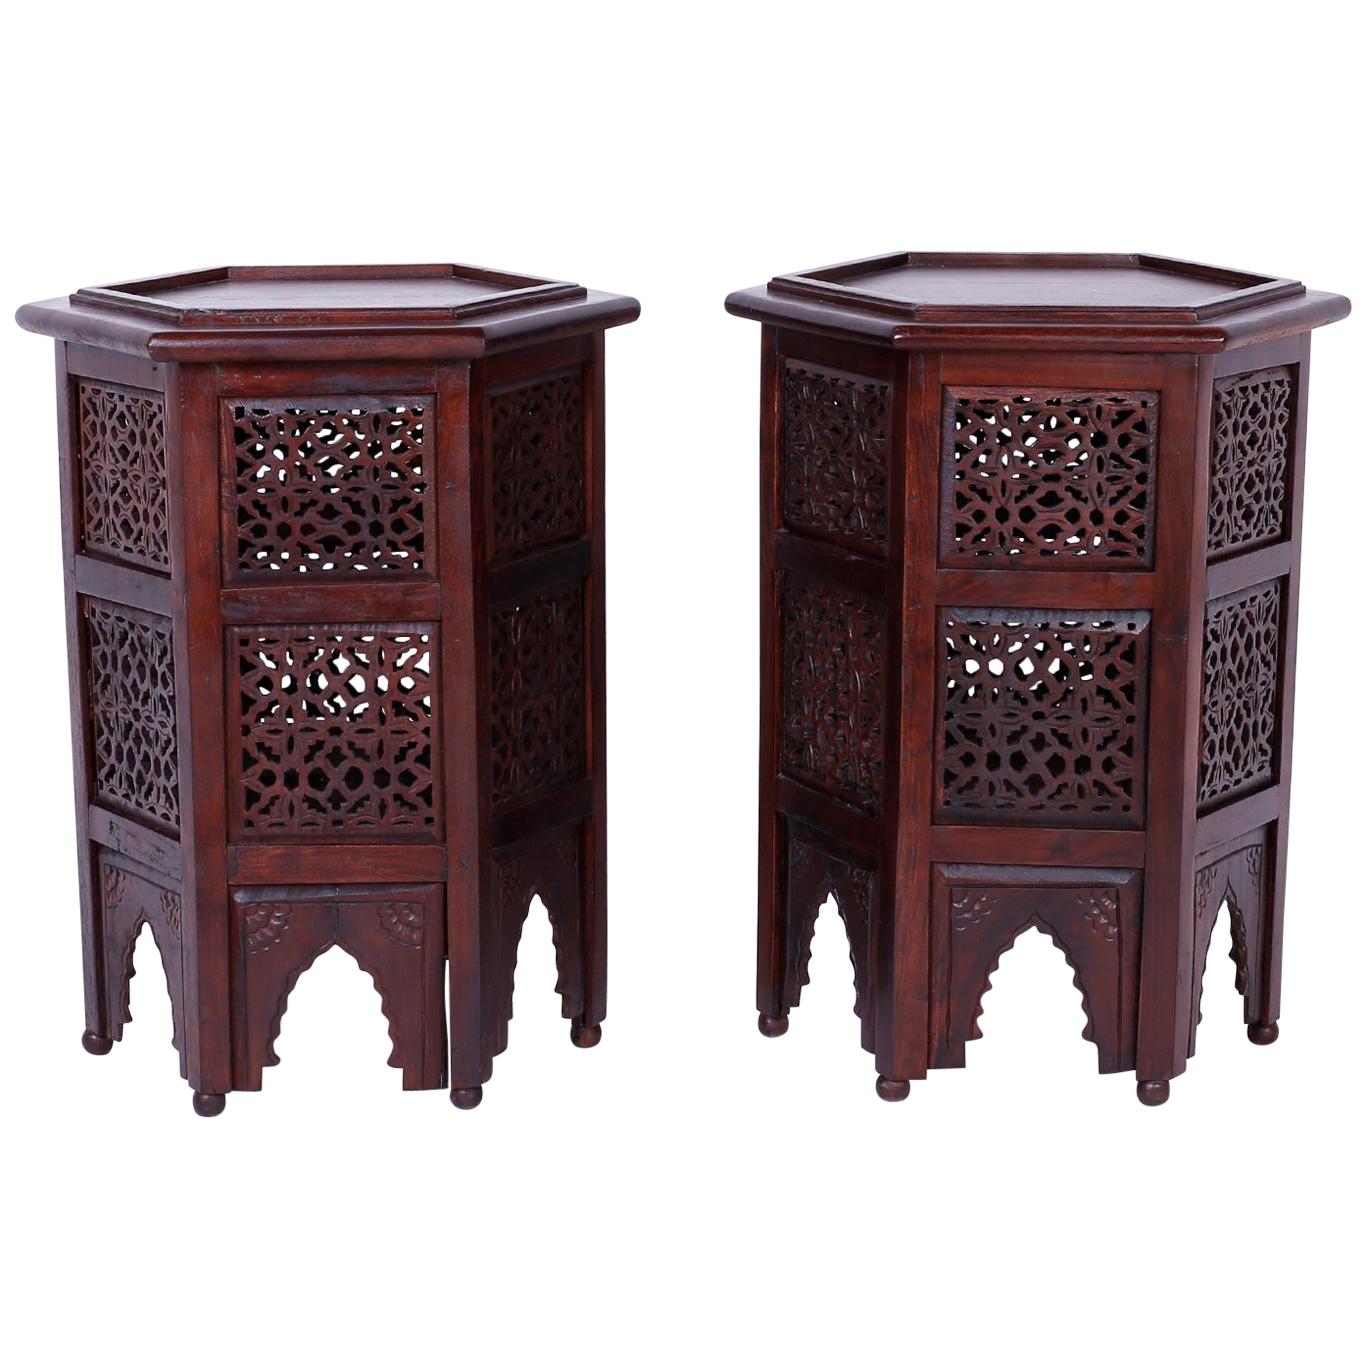 Pair of Moroccan Hexagon Stands or Tables